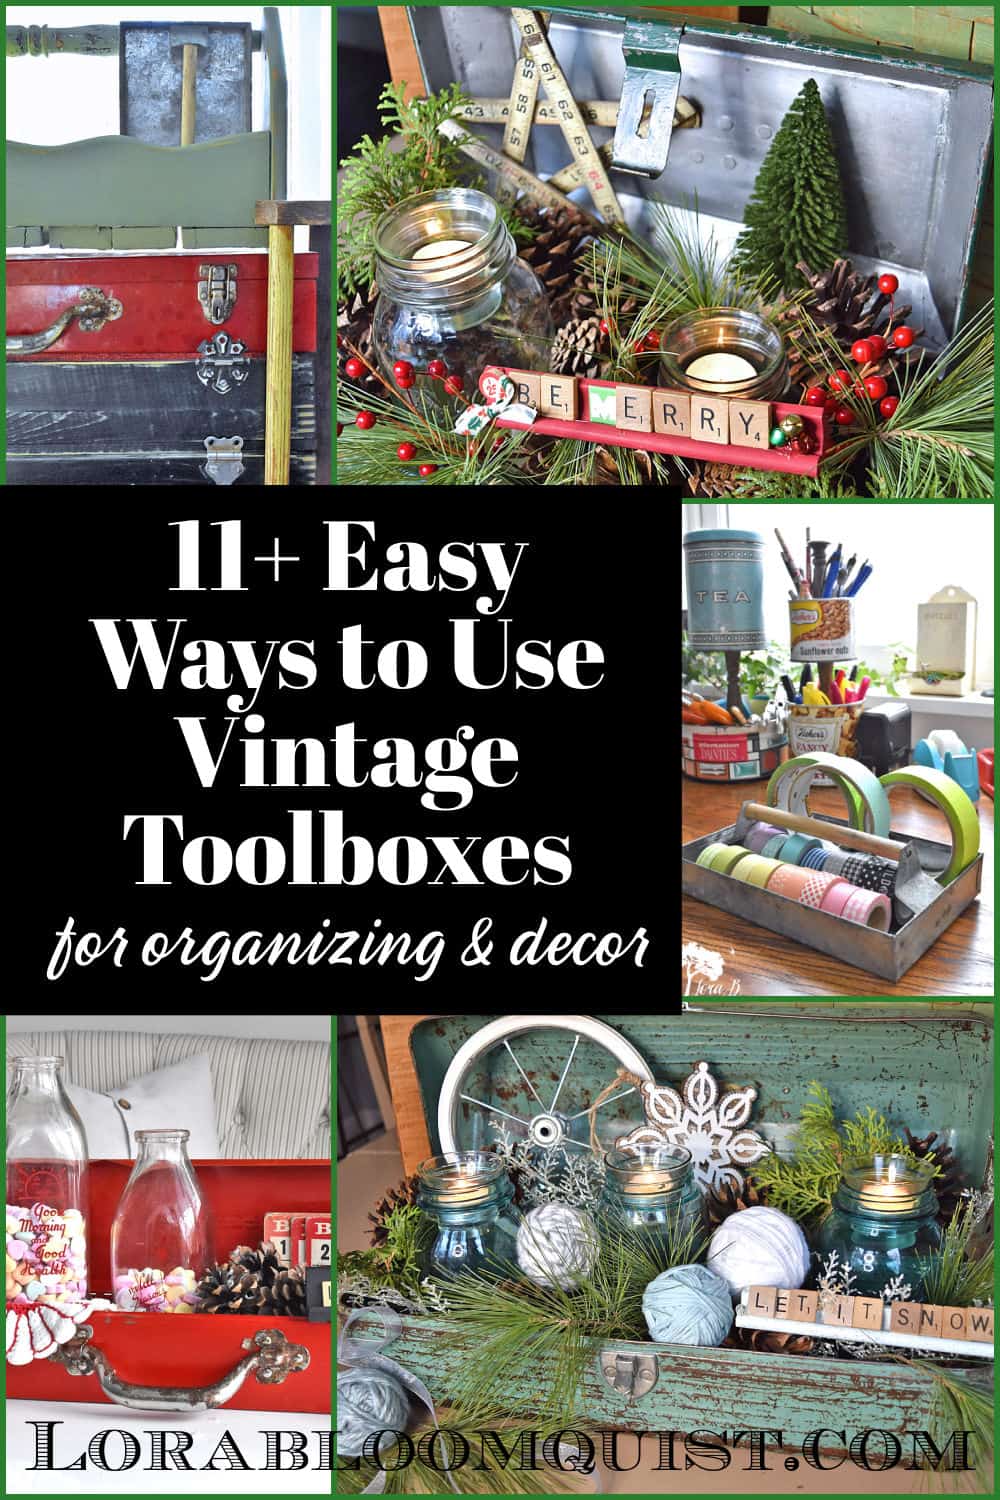 11+ Creative Ways to Use Old Tool Boxes (all through the house